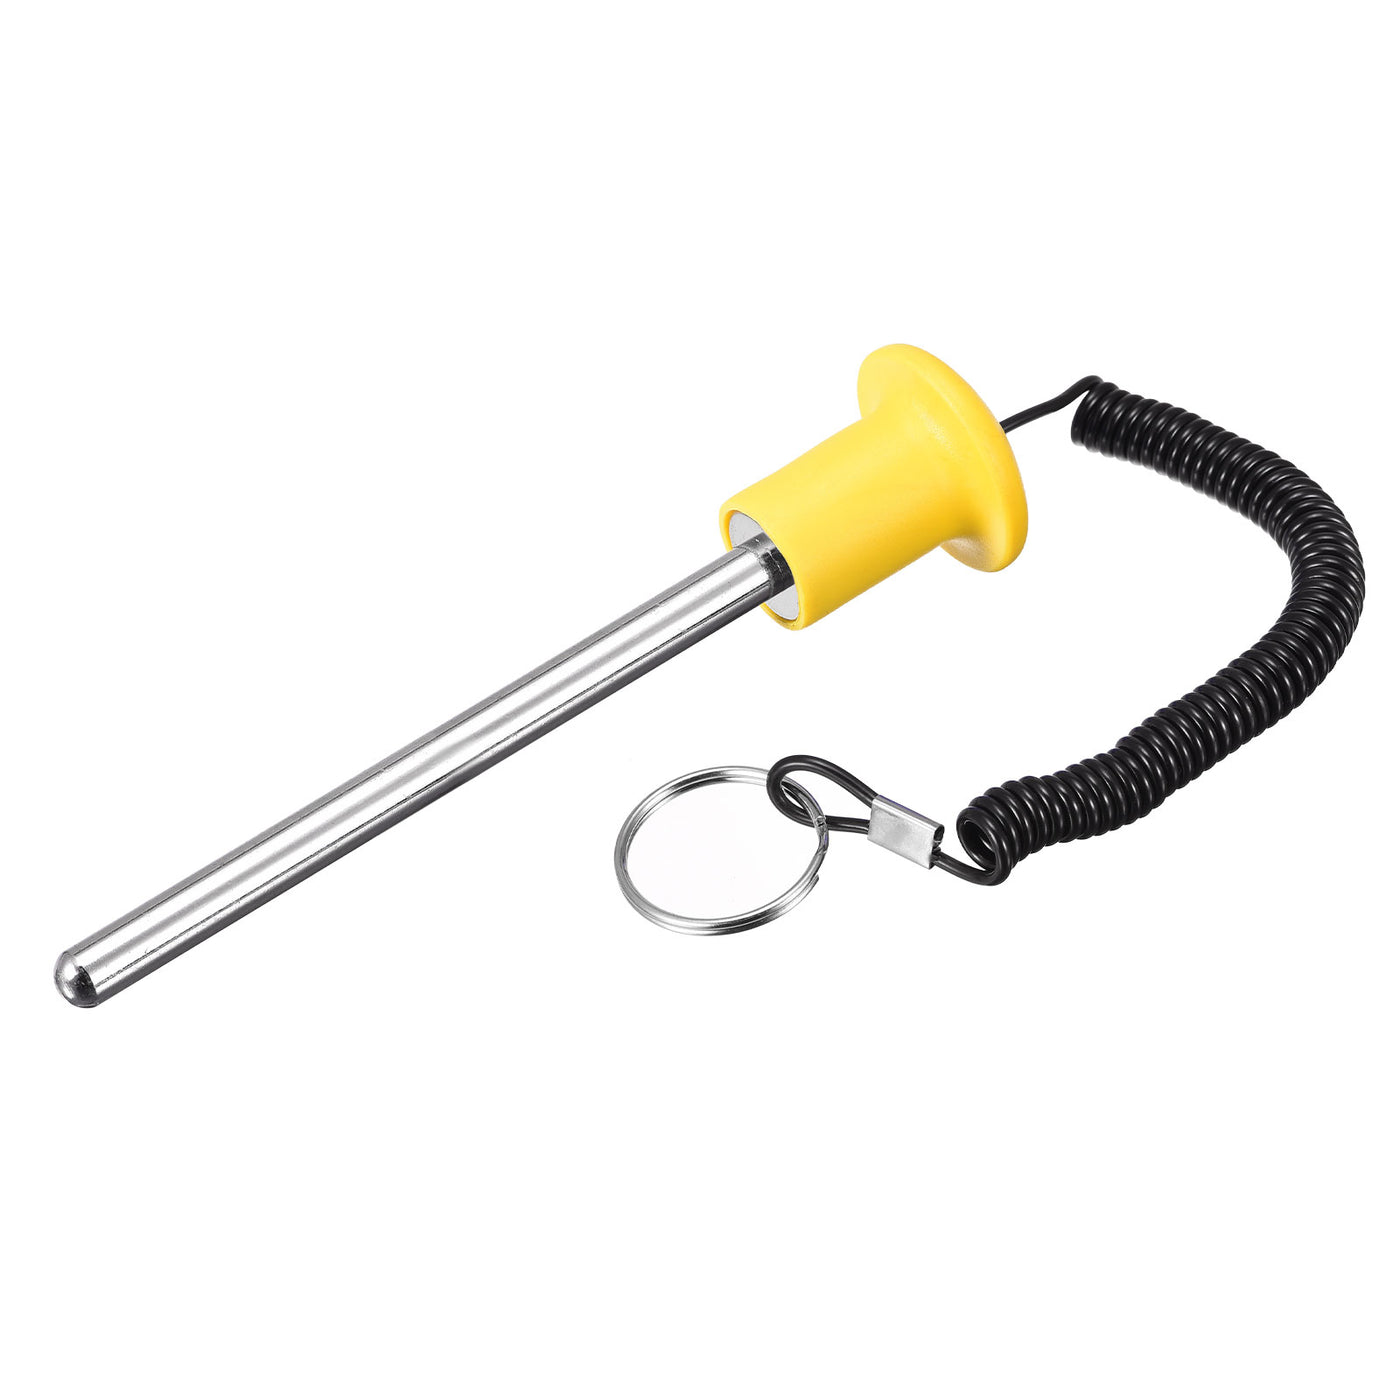 Uxcell Uxcell 8mm x 125mm Weight Stack Pin with Pull Rope Magnetic Strength Training Yellow